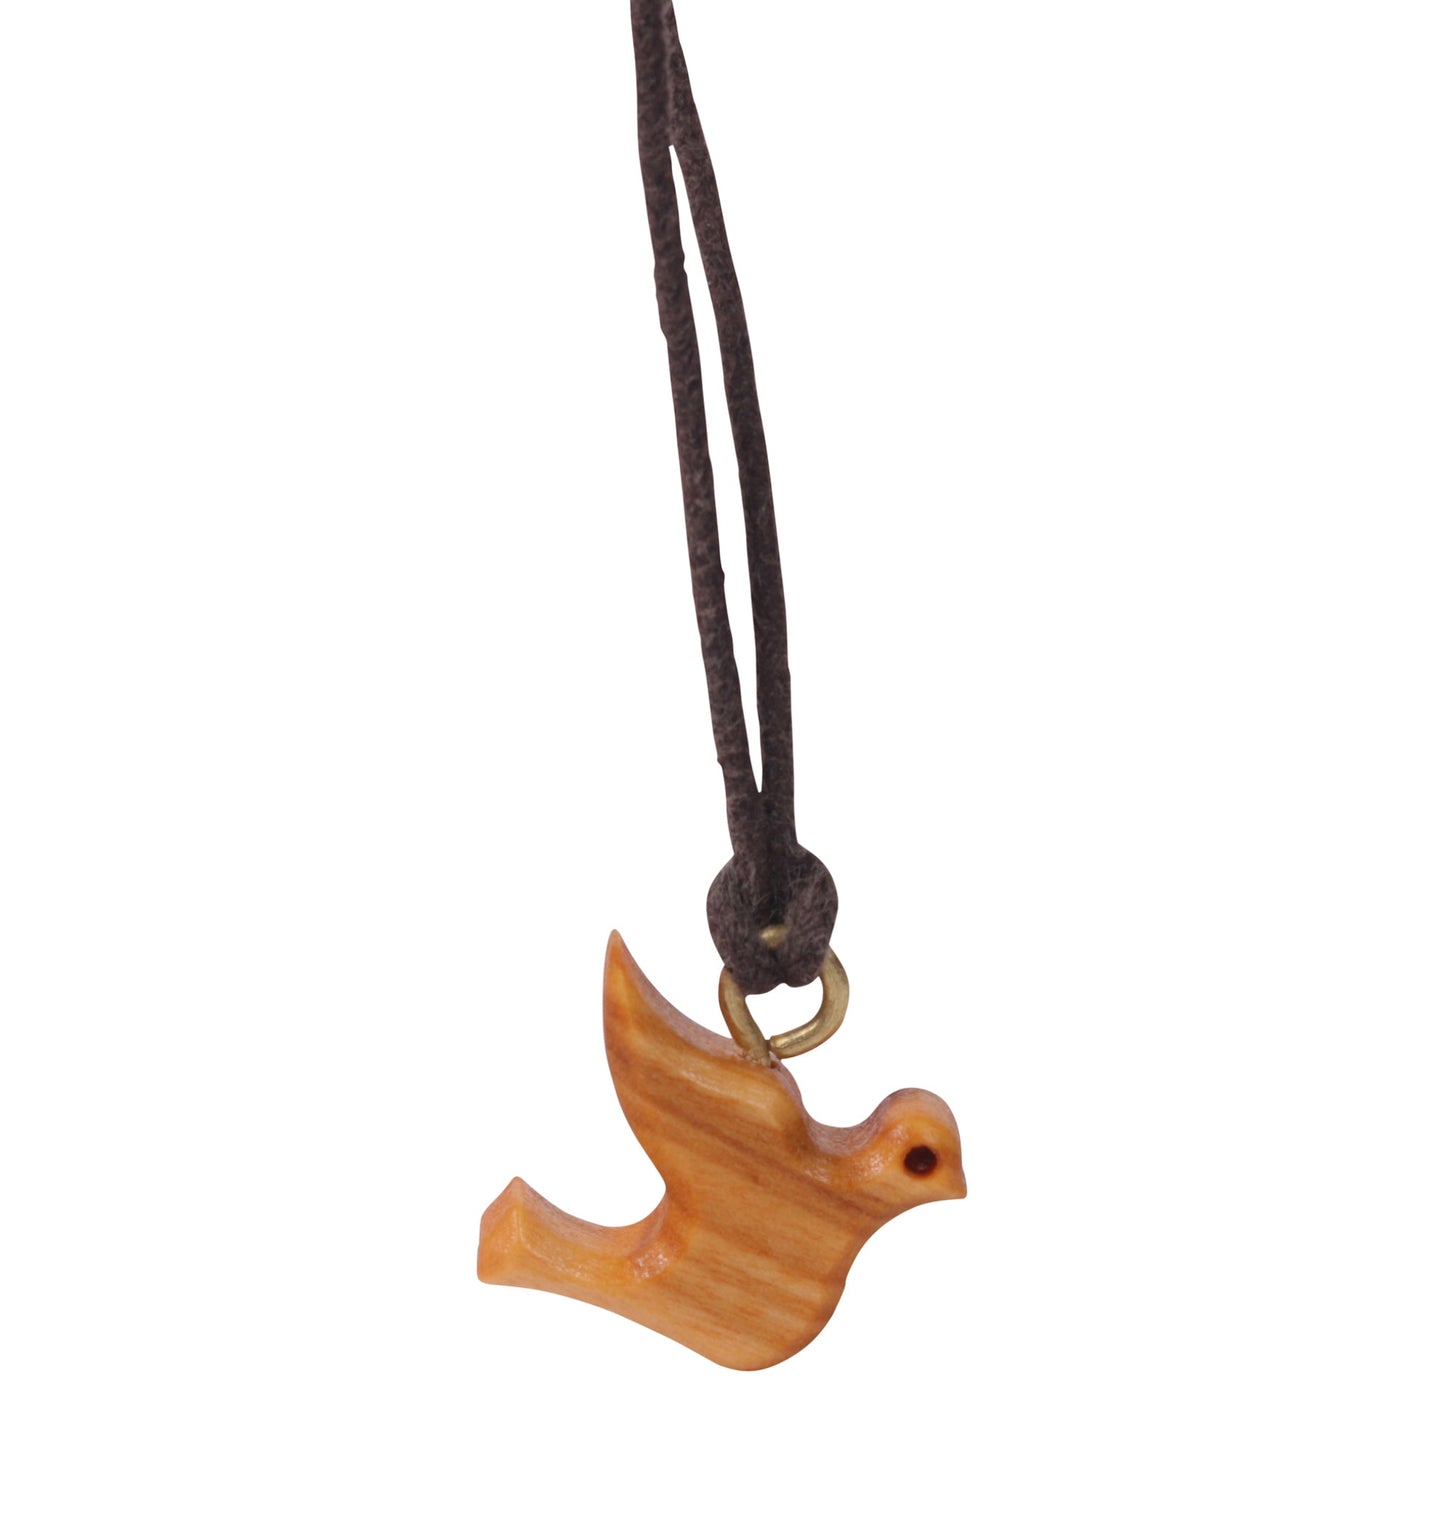 This pendant is a delicately carved representation of a dove, crafted from olive wood, which lends it a rich and warm natural tone. The dove's form is simplistic yet recognizable, capturing the essence of the bird with smooth curves and gentle contours. The dove pendant is attached to a cotton cord, making it suitable for wearing around the neck.